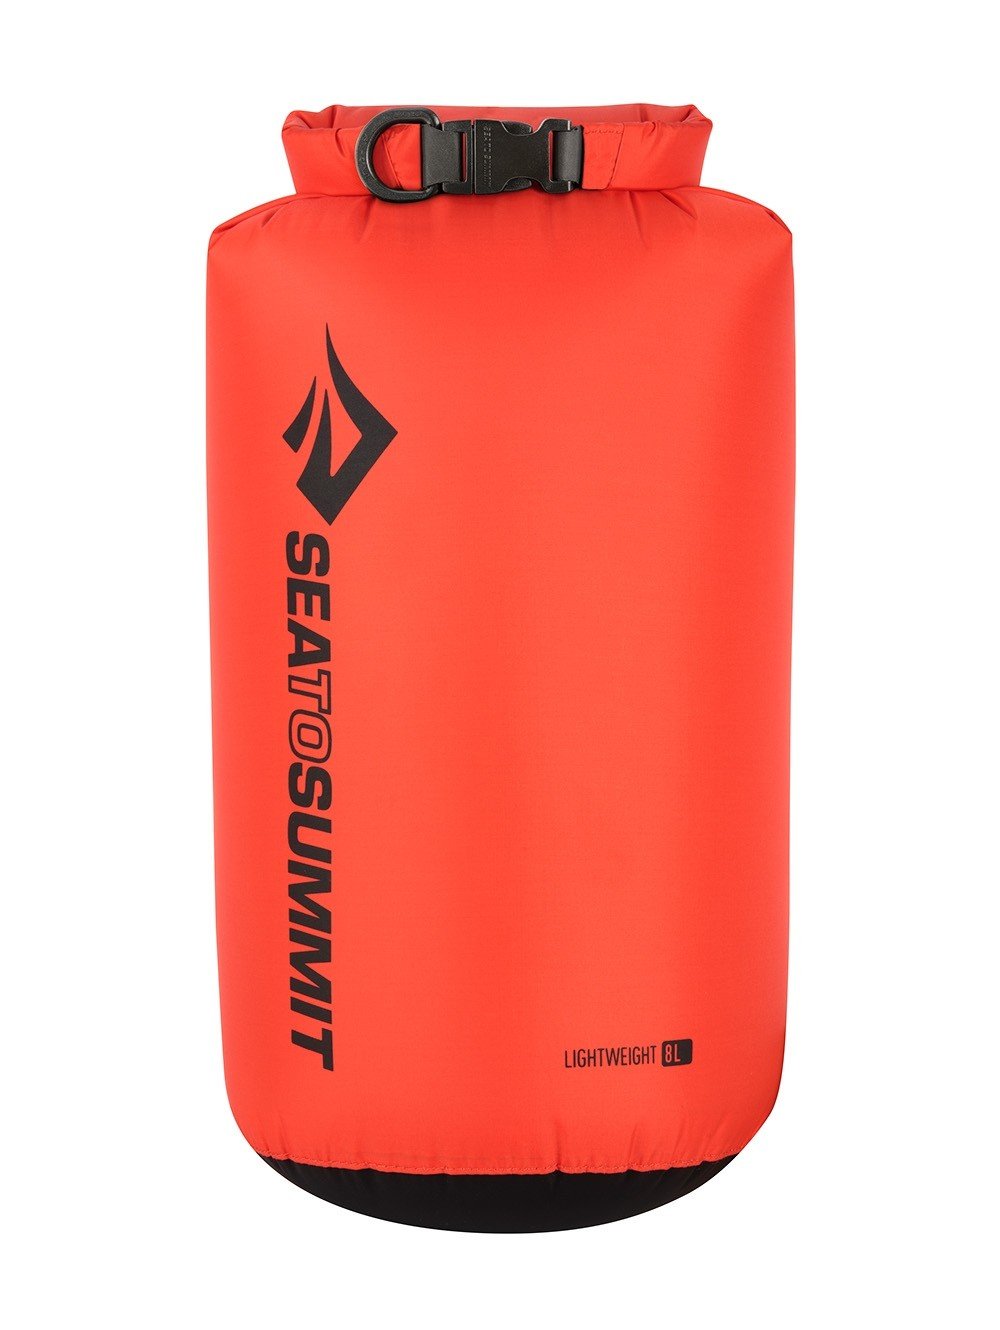 Sea To Summit Lightweight 70D 8 Litres Dry Sack Bags, Packs and Cases Sea To Summit Red Tactical Gear Supplier Tactical Distributors Australia